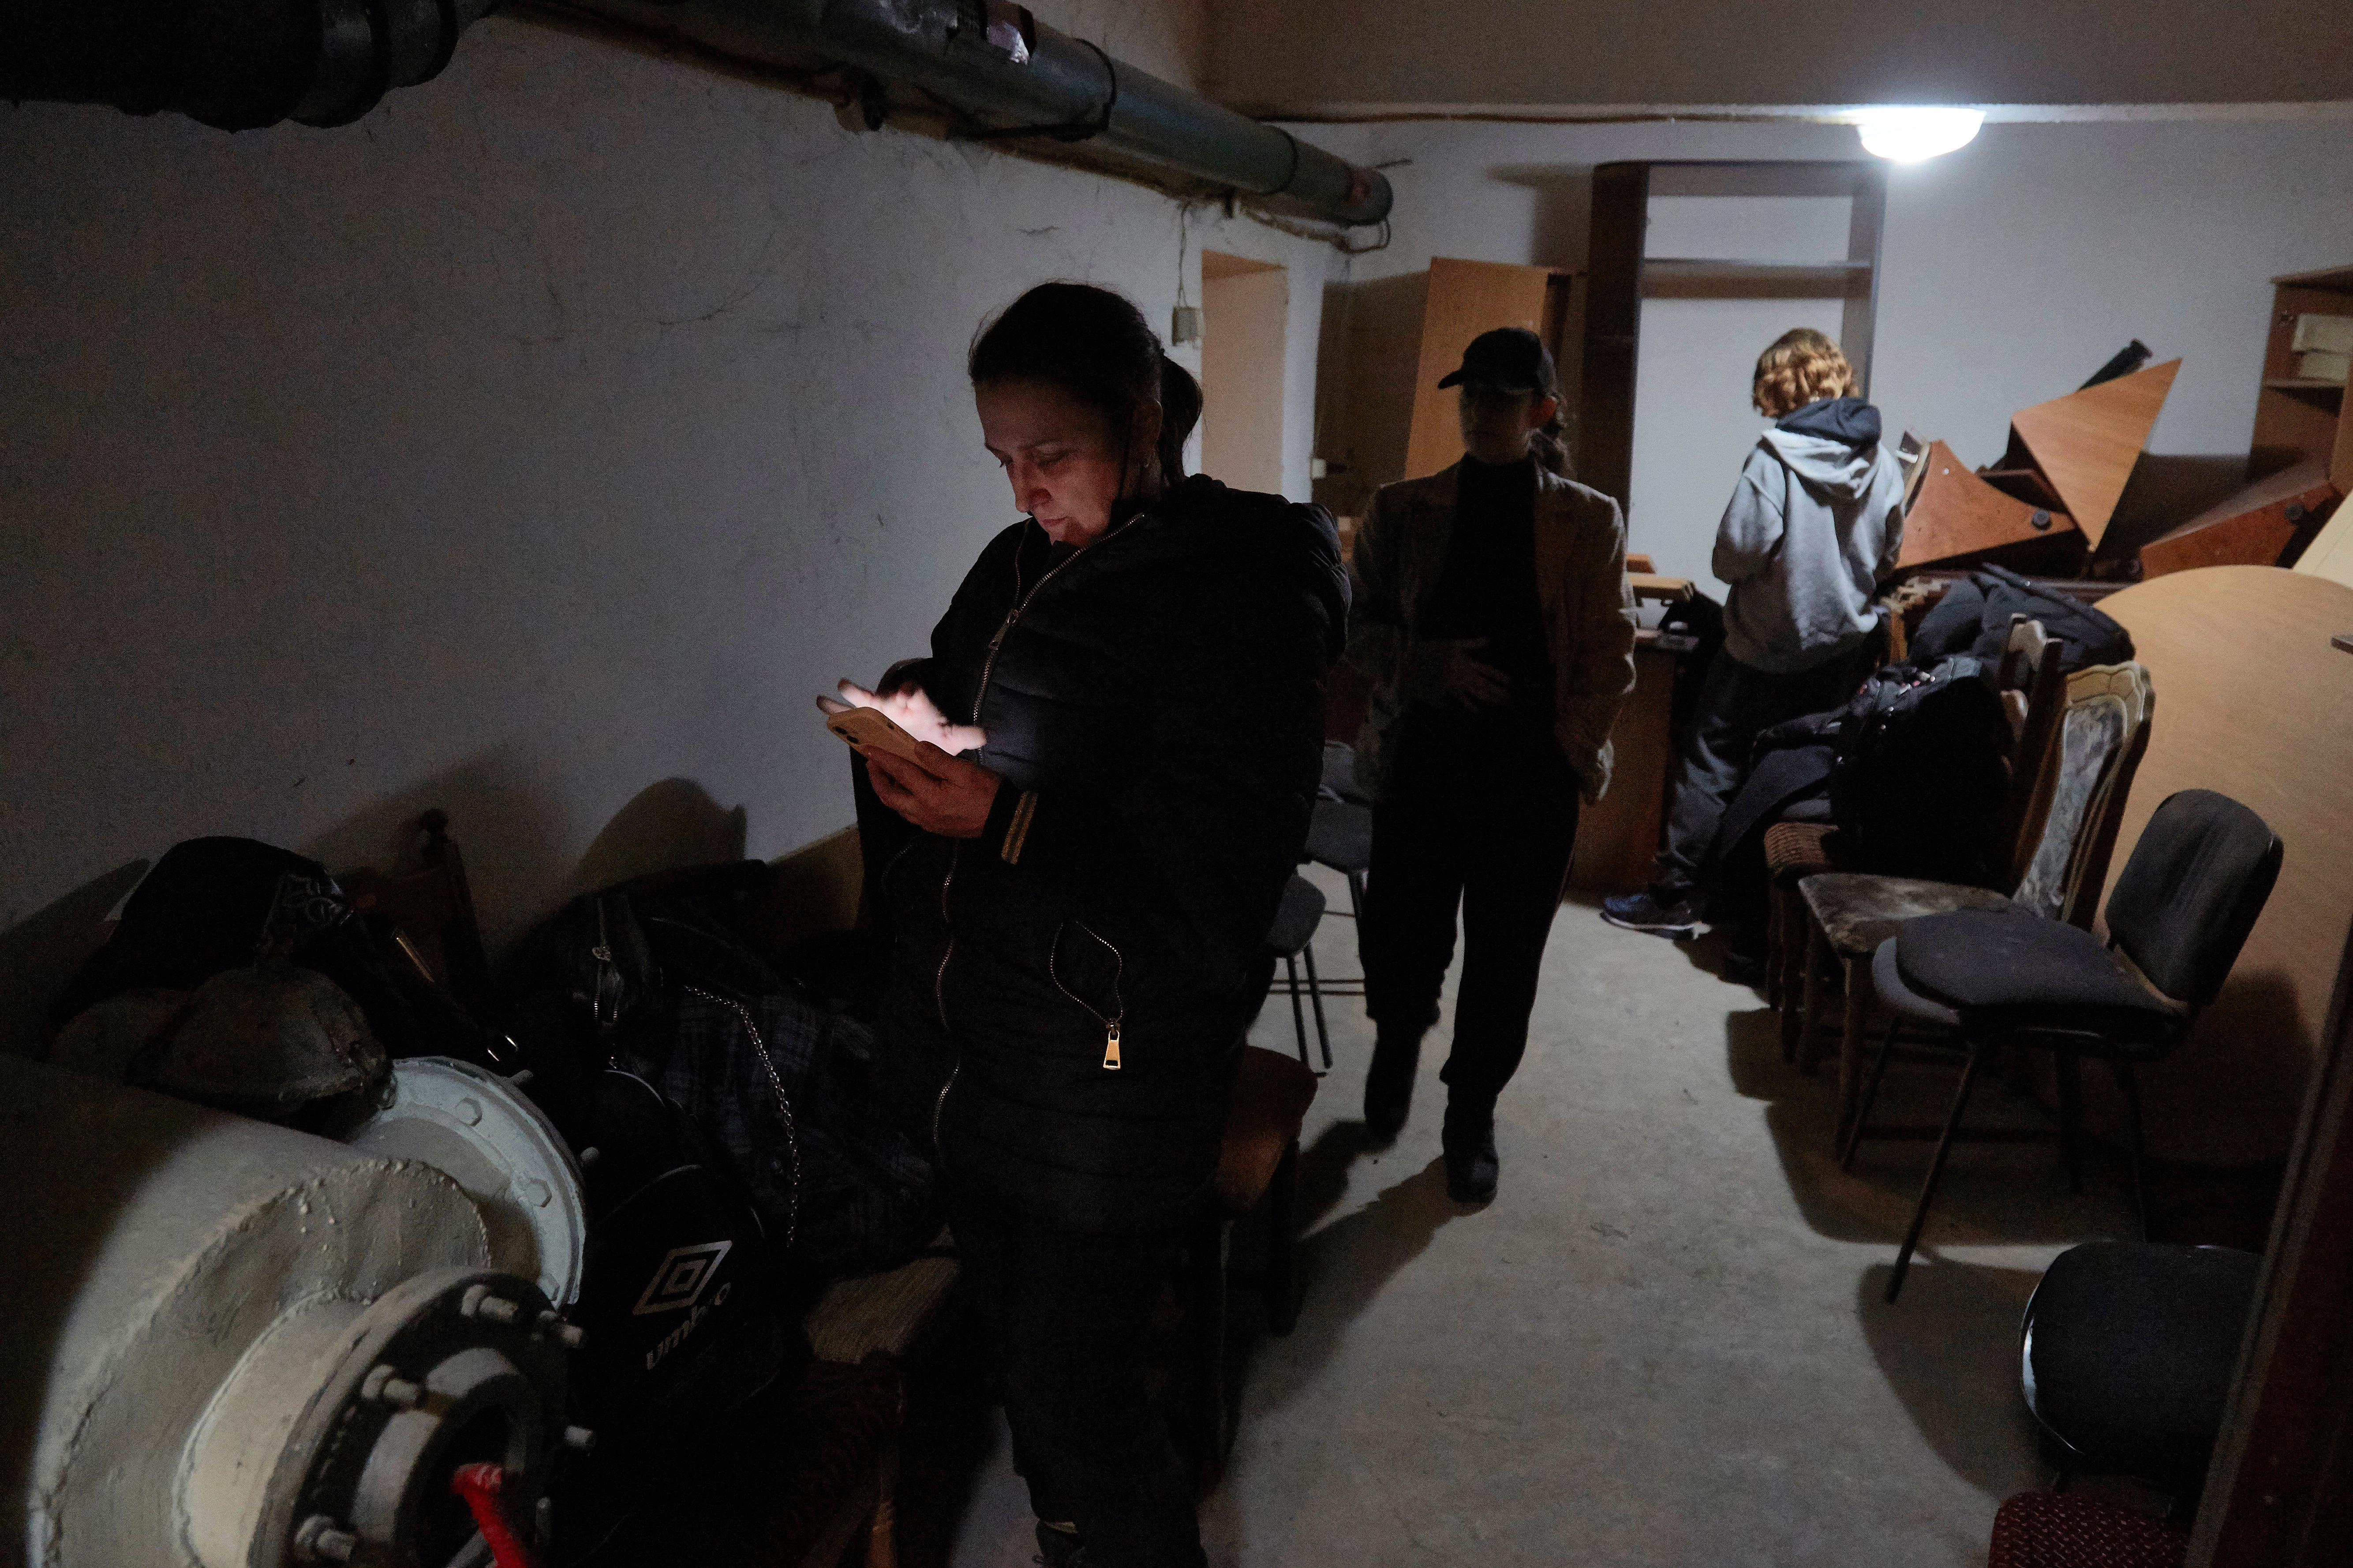 Local residents follow the news on their mobile devices in a bomb shelter on 24 February 2022 in Kyiv, Ukraine